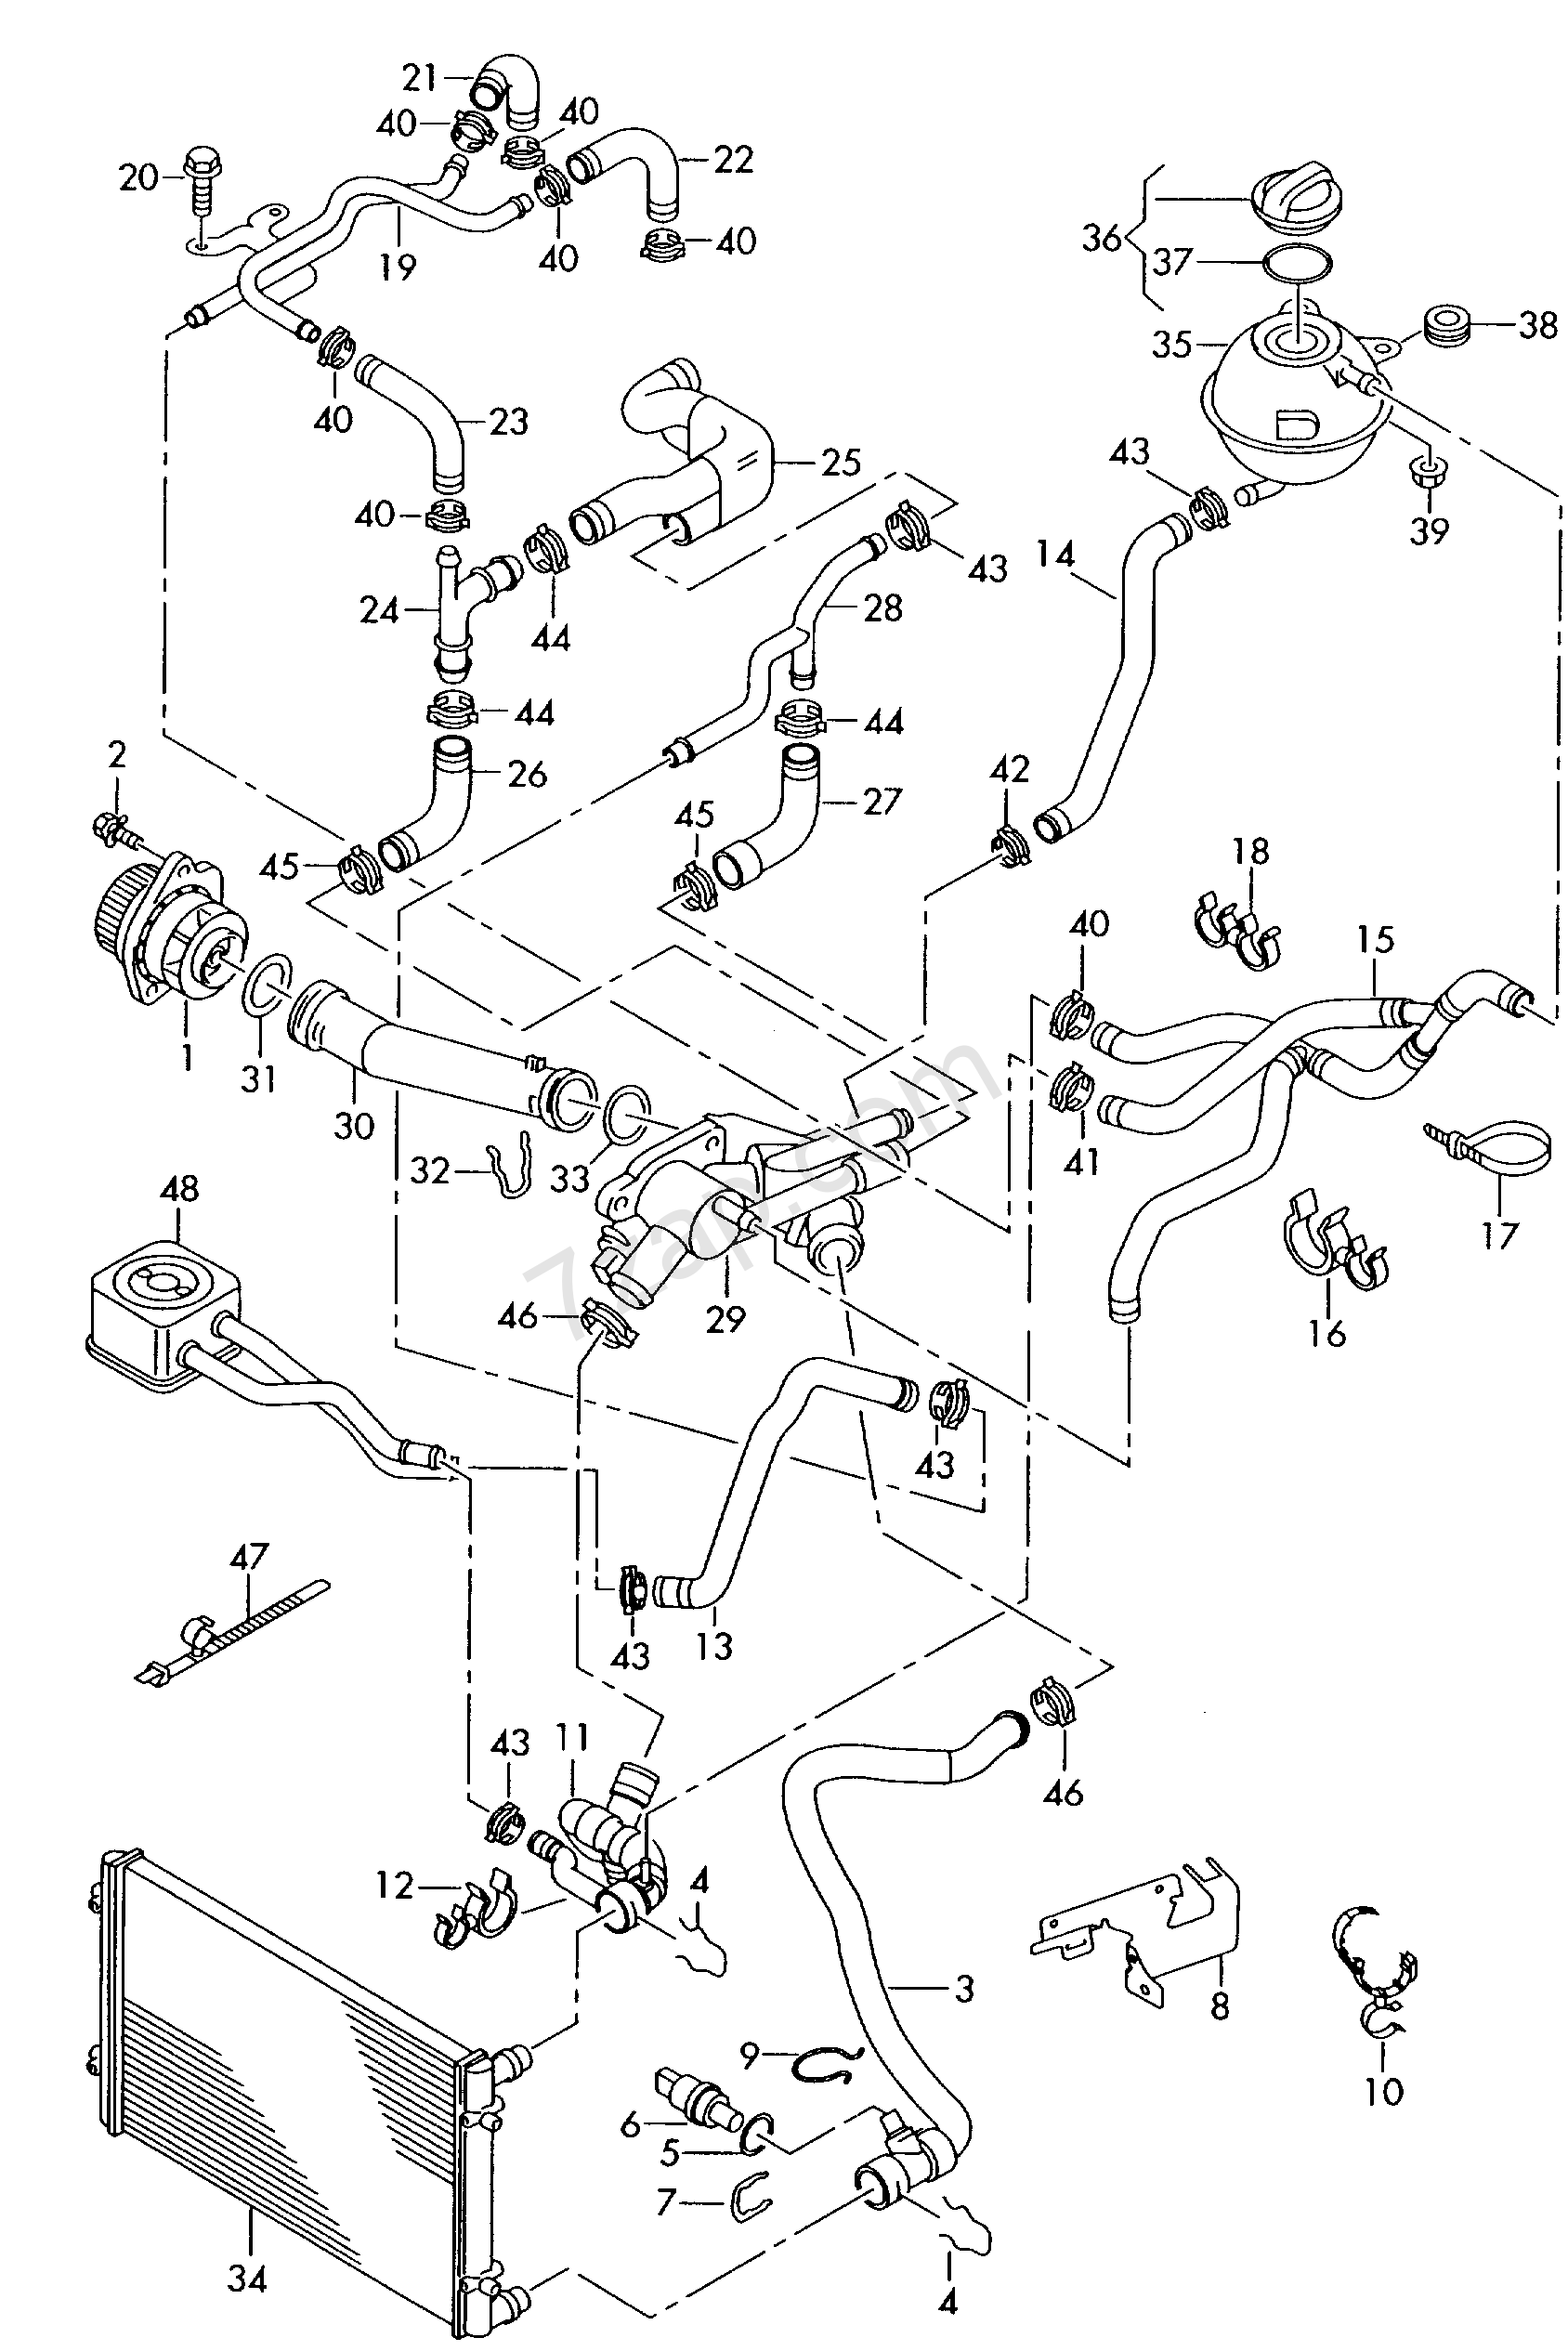 FSI Coolant System Parts Schematic.png